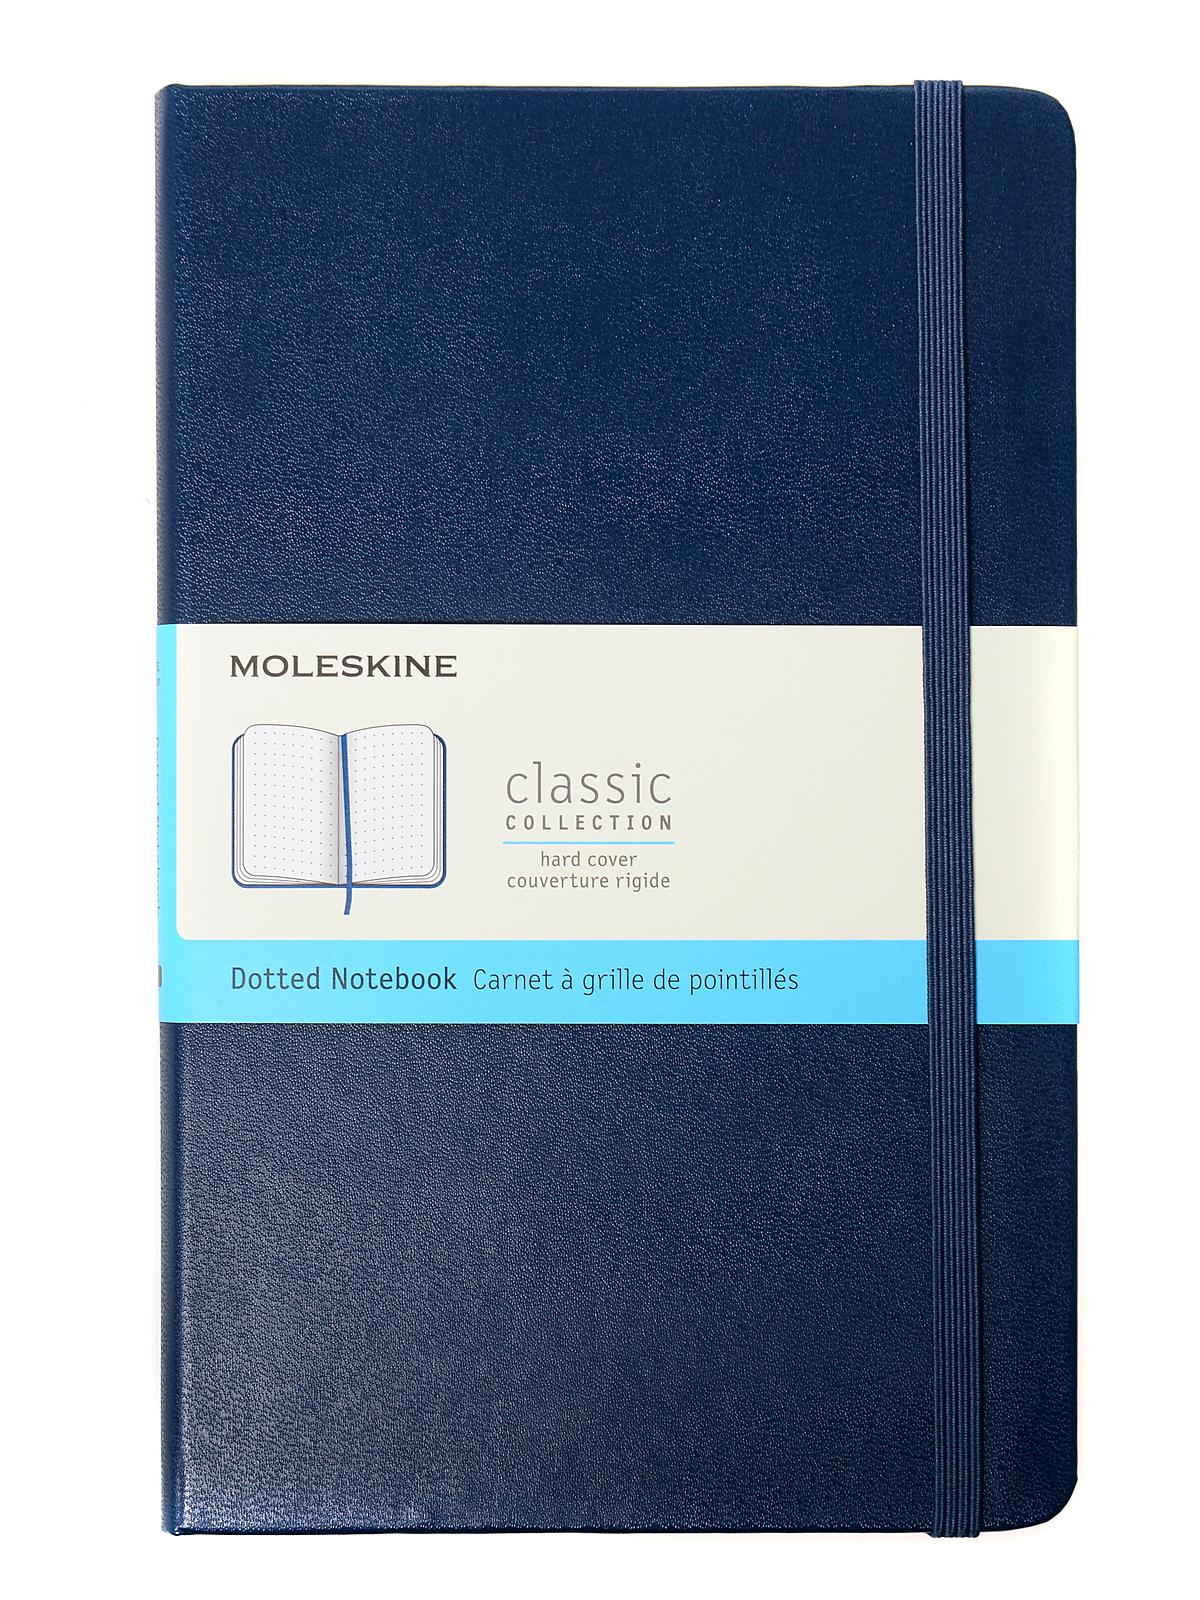 Classic Hard Cover Notebooks Sapphire Blue 5 In. X 8 1 4 In. 240 Pages, Dotted